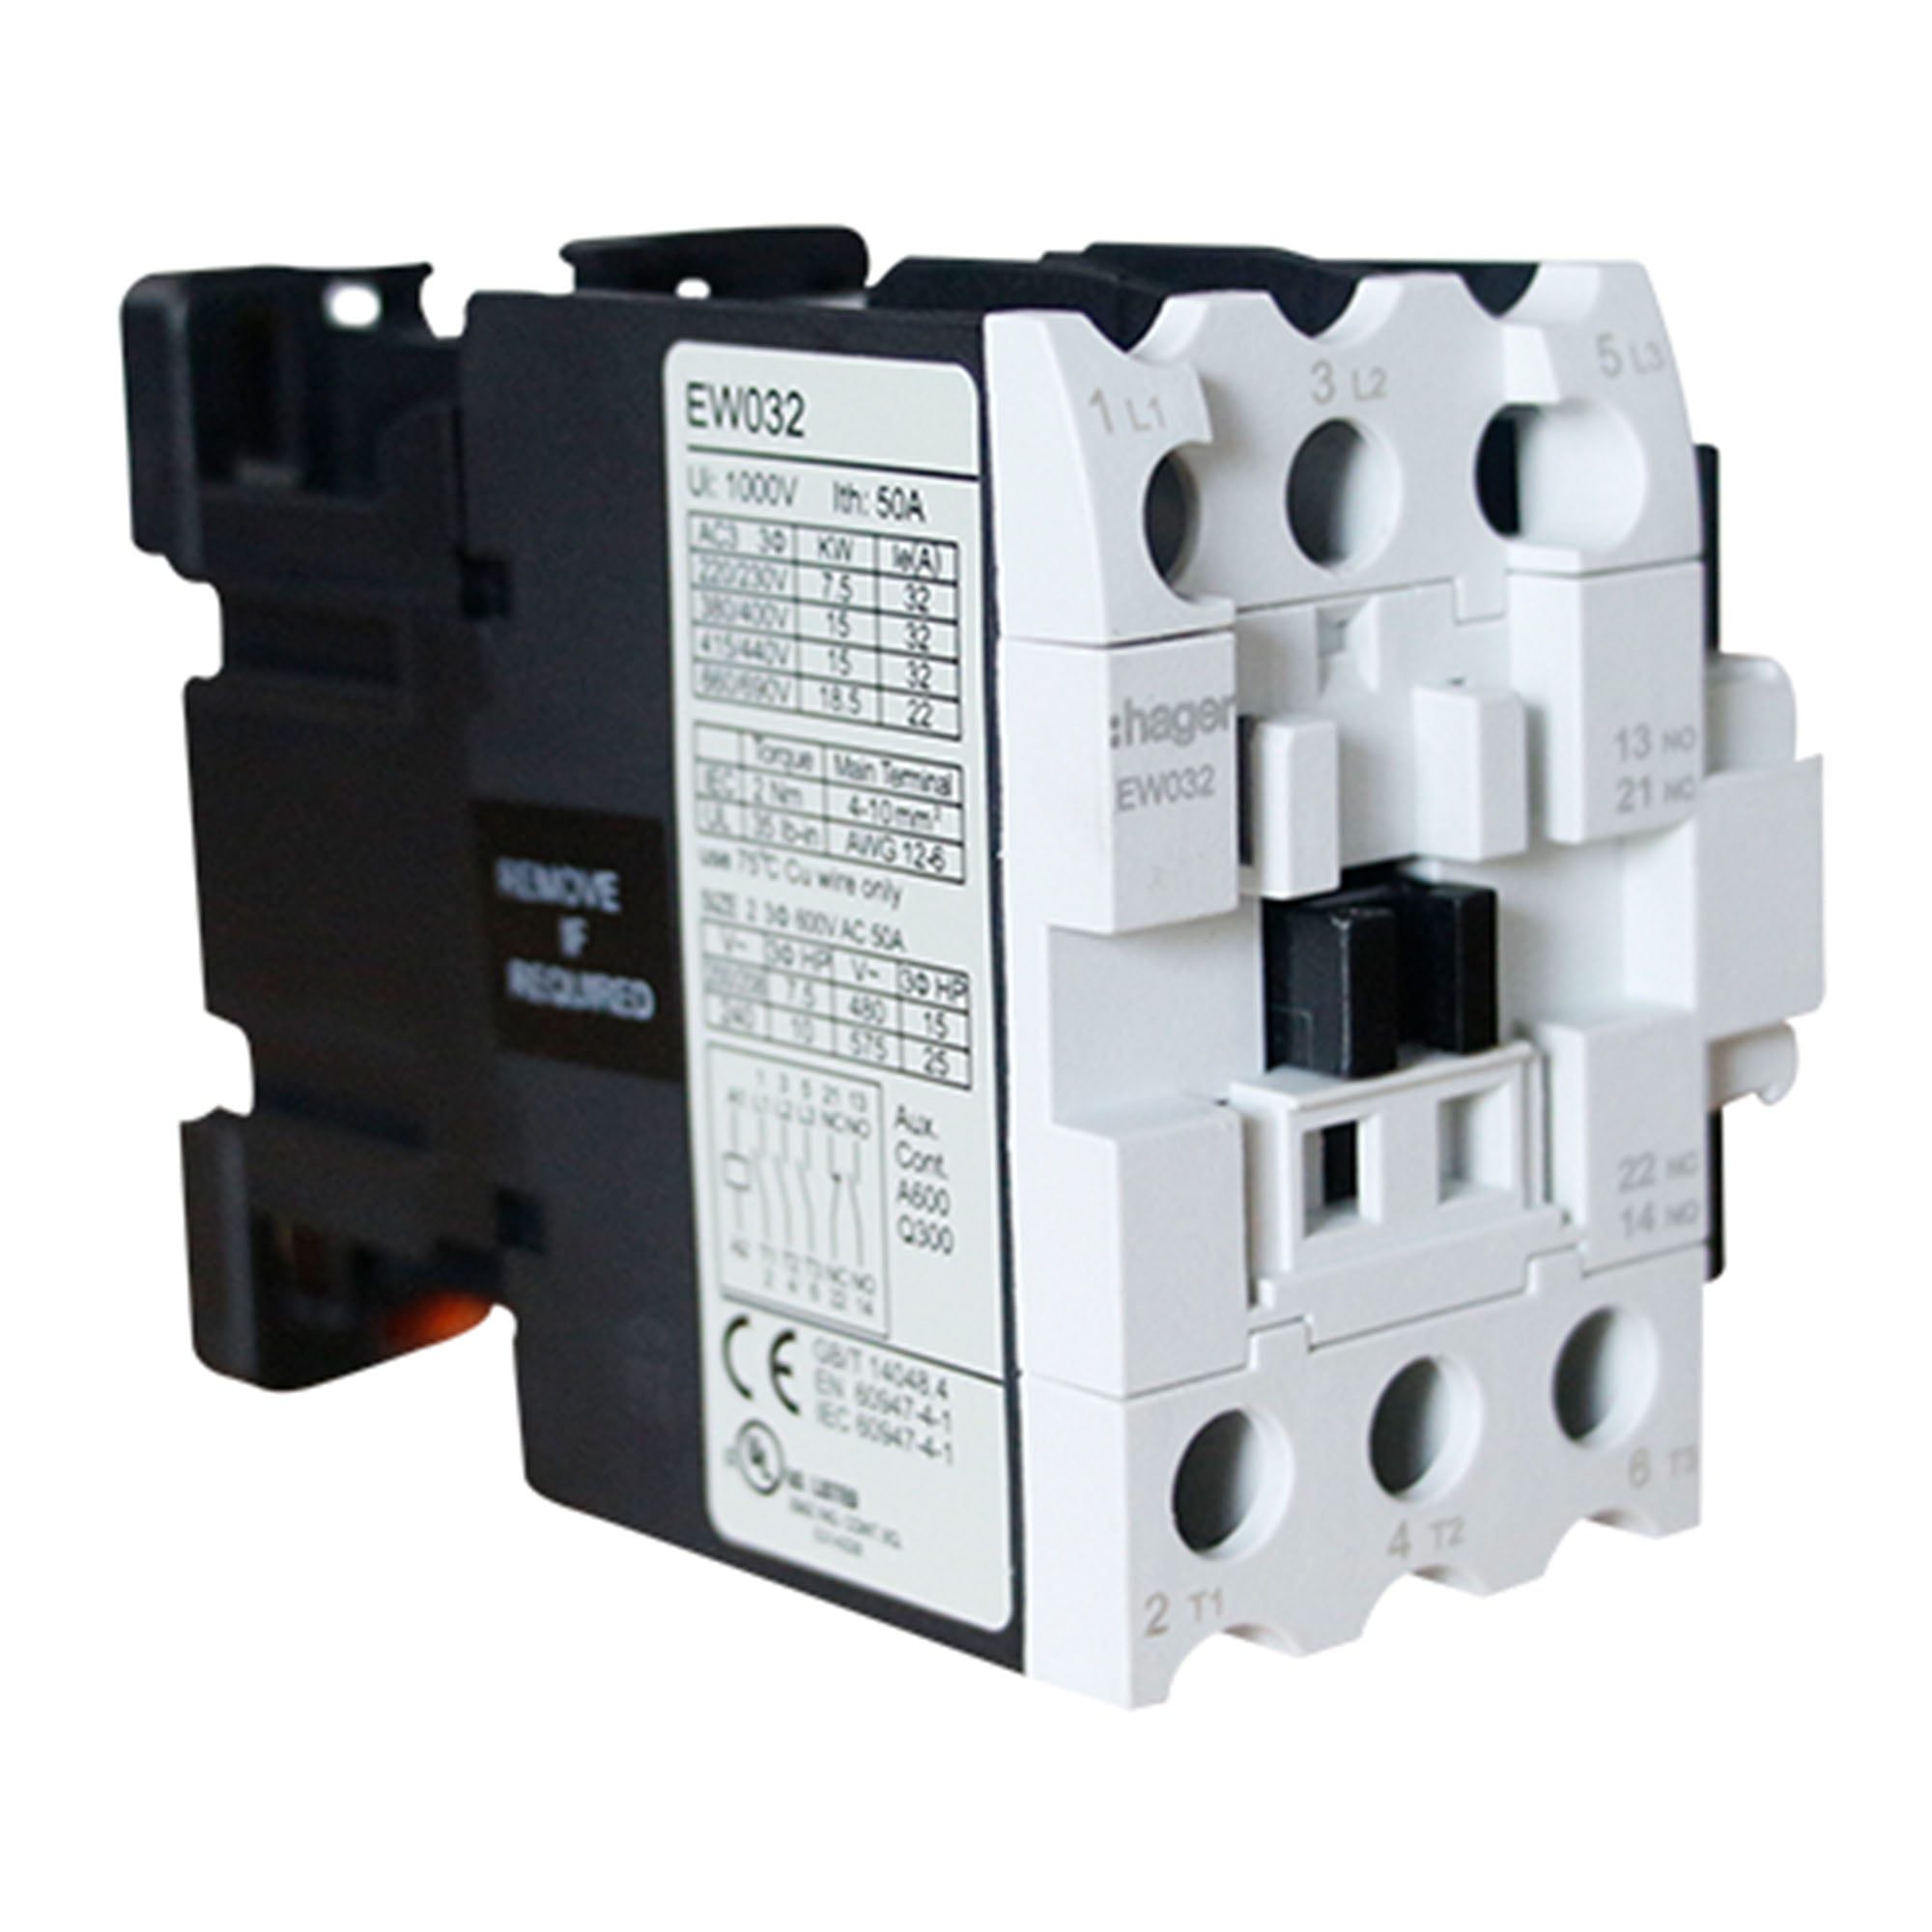 TOMA EMPOTRABLE 32AMP 2P+T 250V AZUL 6H IP44